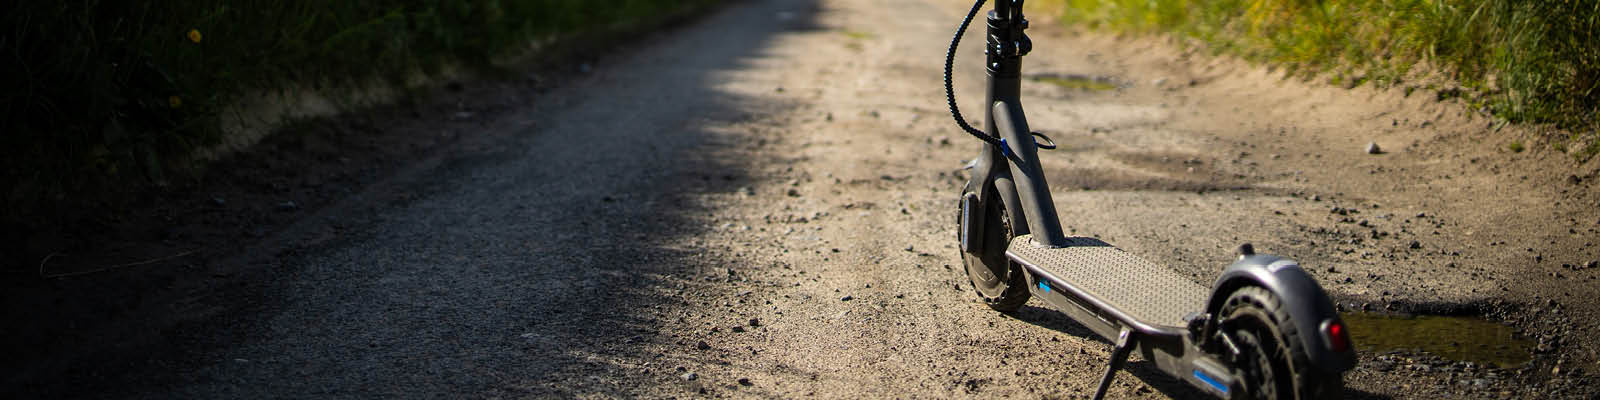 A close up of an electric scooter on a rough country path